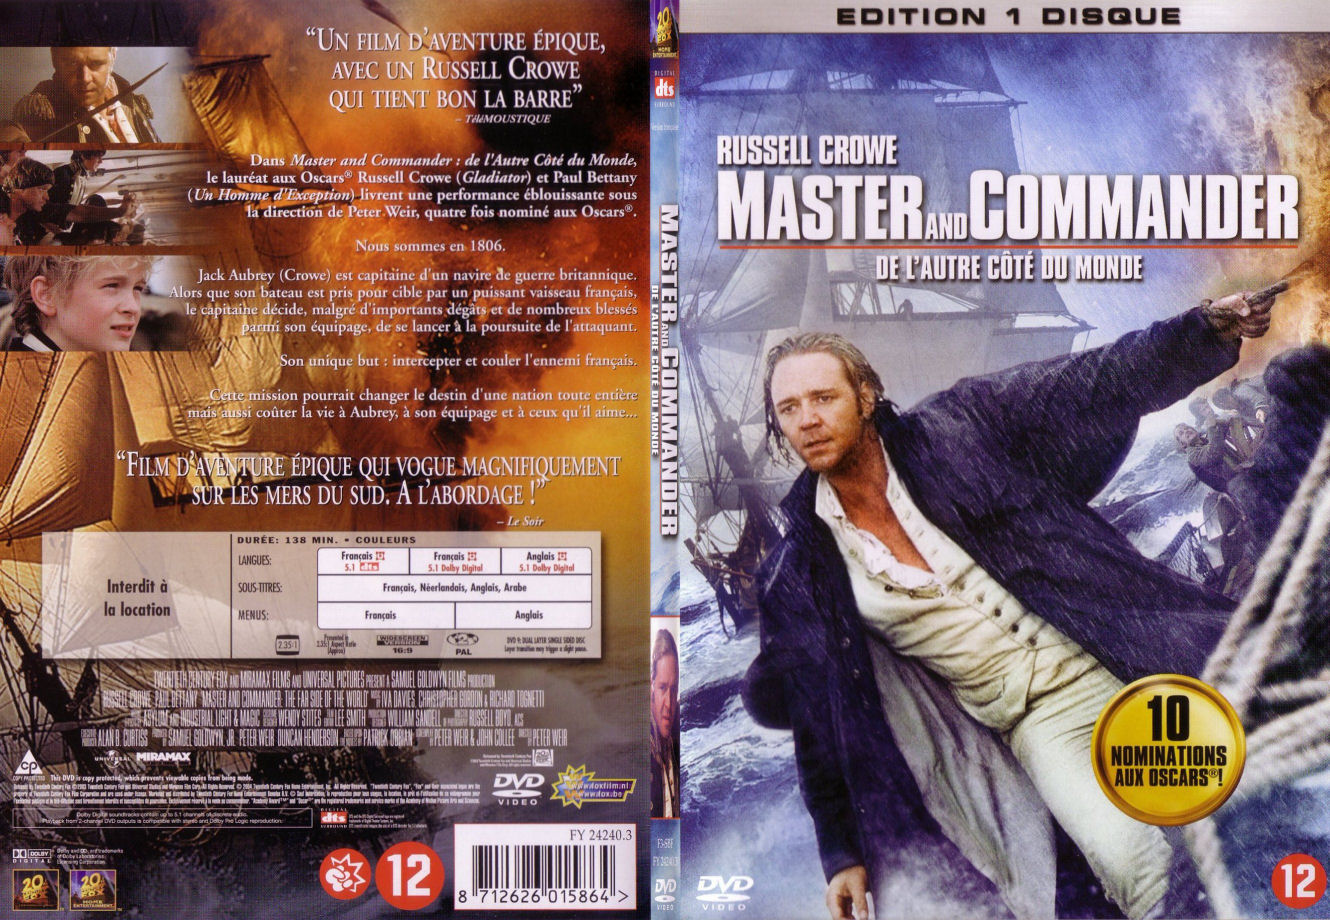 Jaquette DVD Master and Commander - SLIM